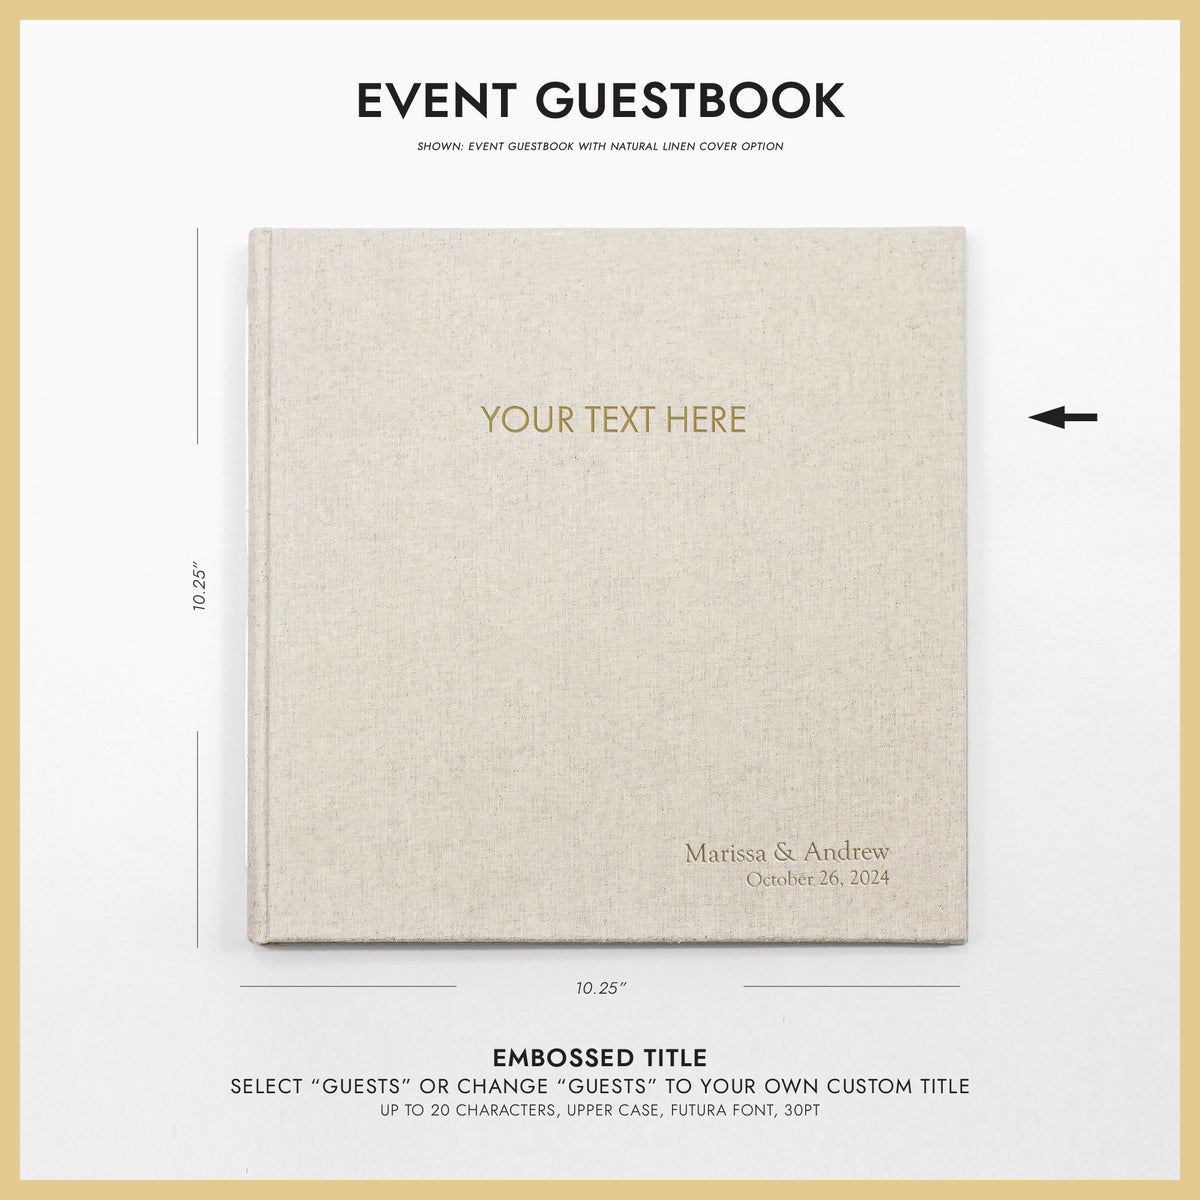 Event Guestbook | Cover: Emerald Silk | Available Personalized